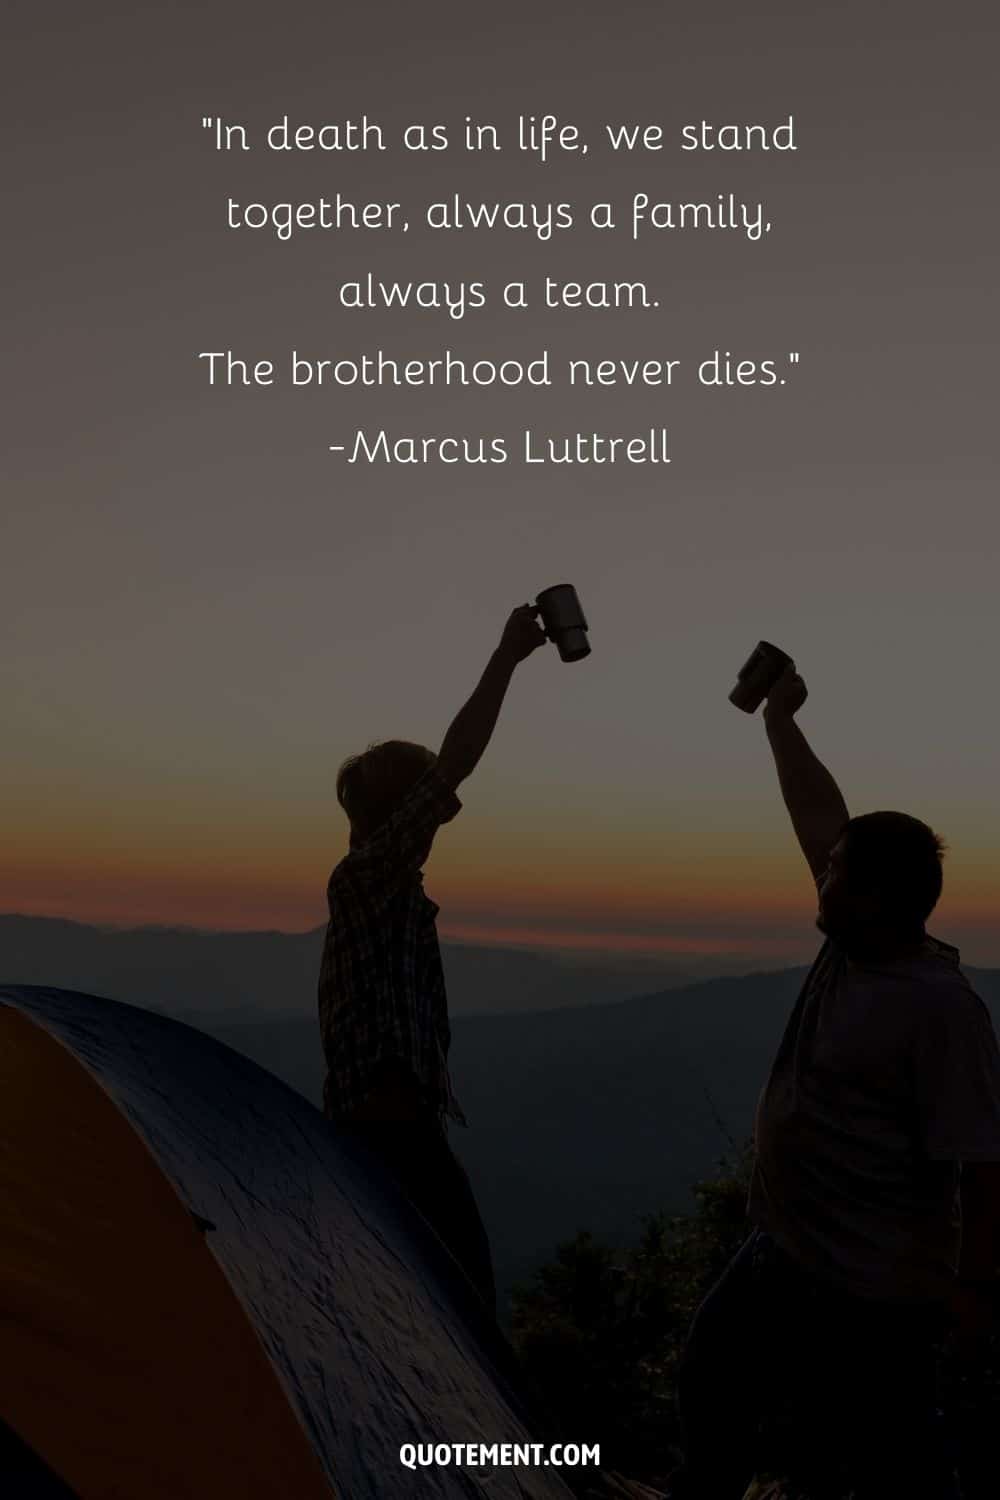 “In death as in life, we stand together, always a family, always a team. The brotherhood never dies.” — Marcus Luttrell